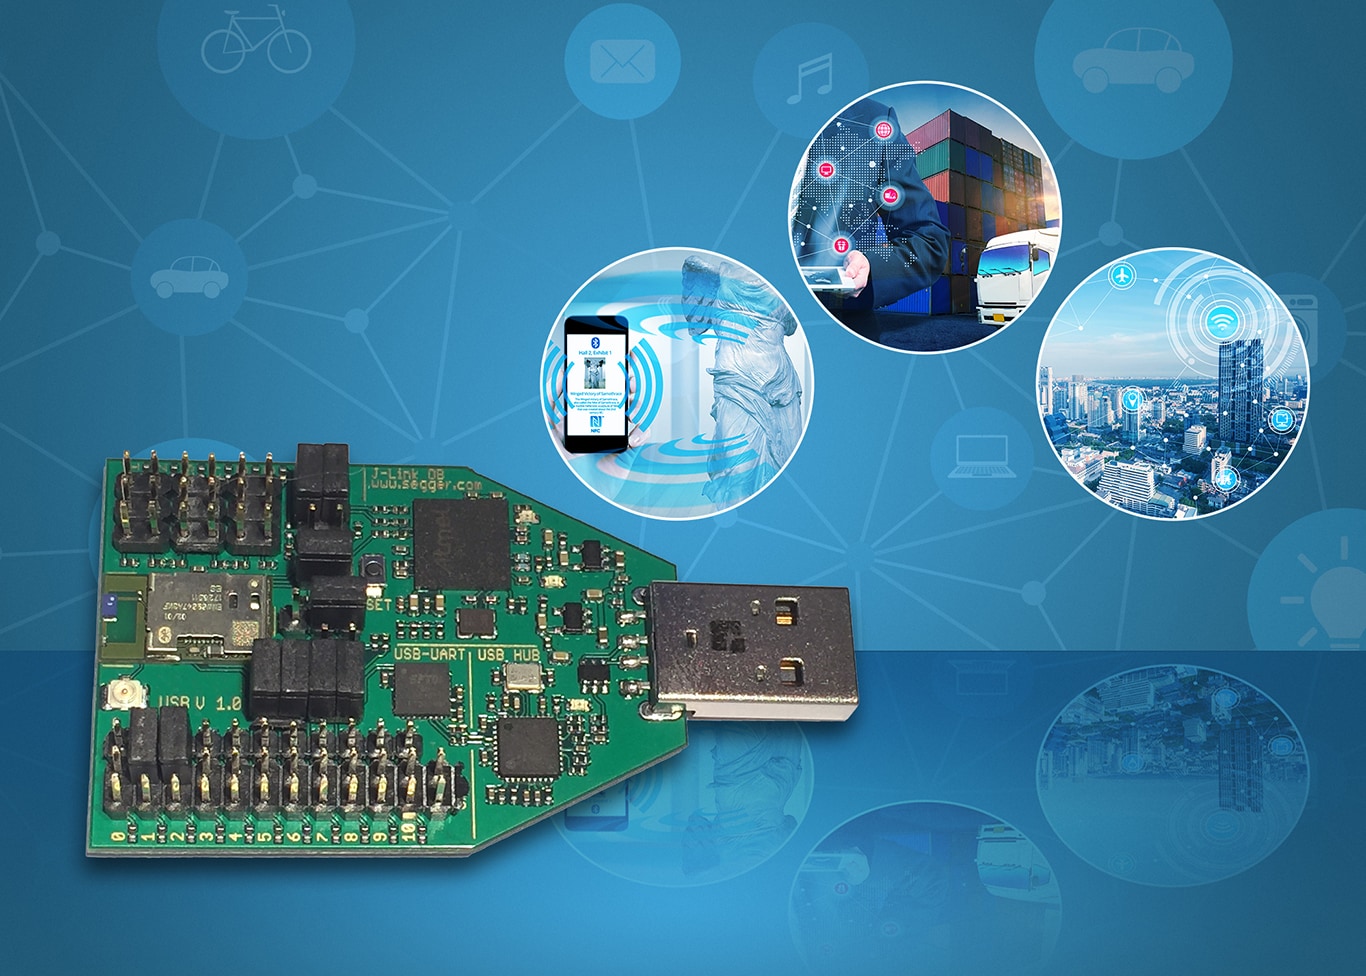 Toshiba releases new Bluetooth 4.2 evaluation and prototyping platform